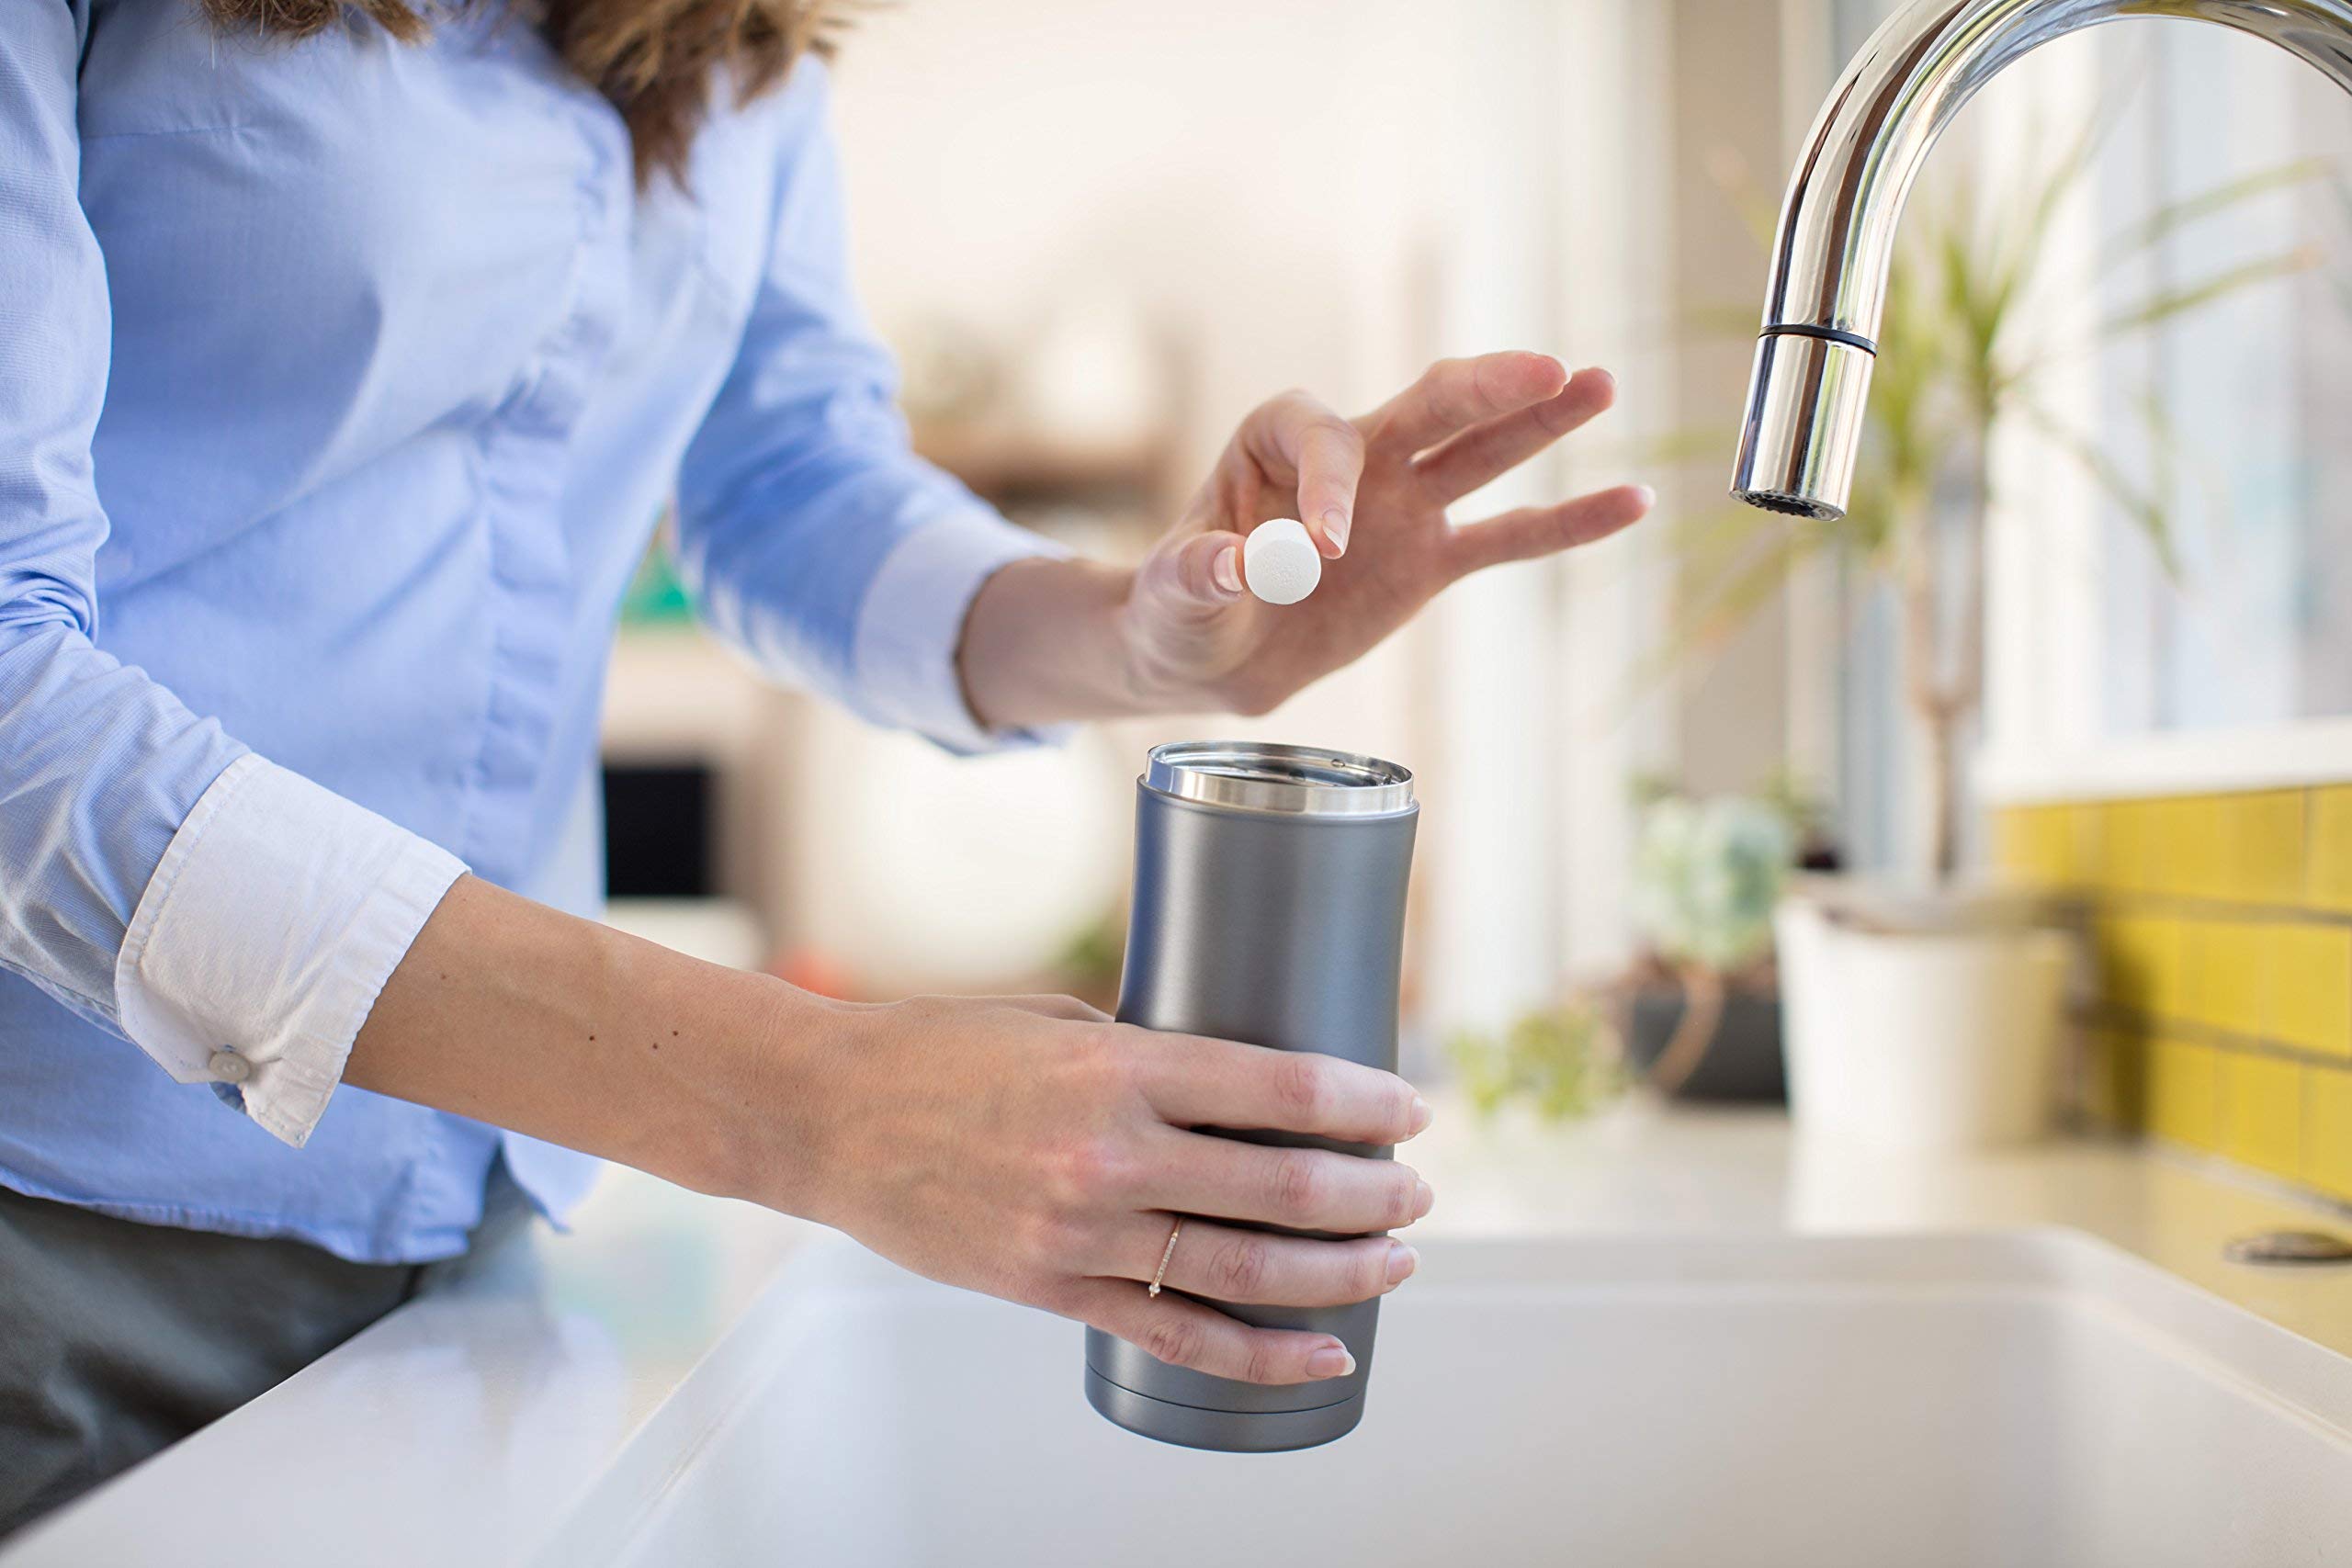 BOTTLE BRIGHT - Clean Stainless Steel, Thermos, Tumbler, Insulated and Reusable Water Bottles –Cleaning Tablets are Easy and Safe to Use